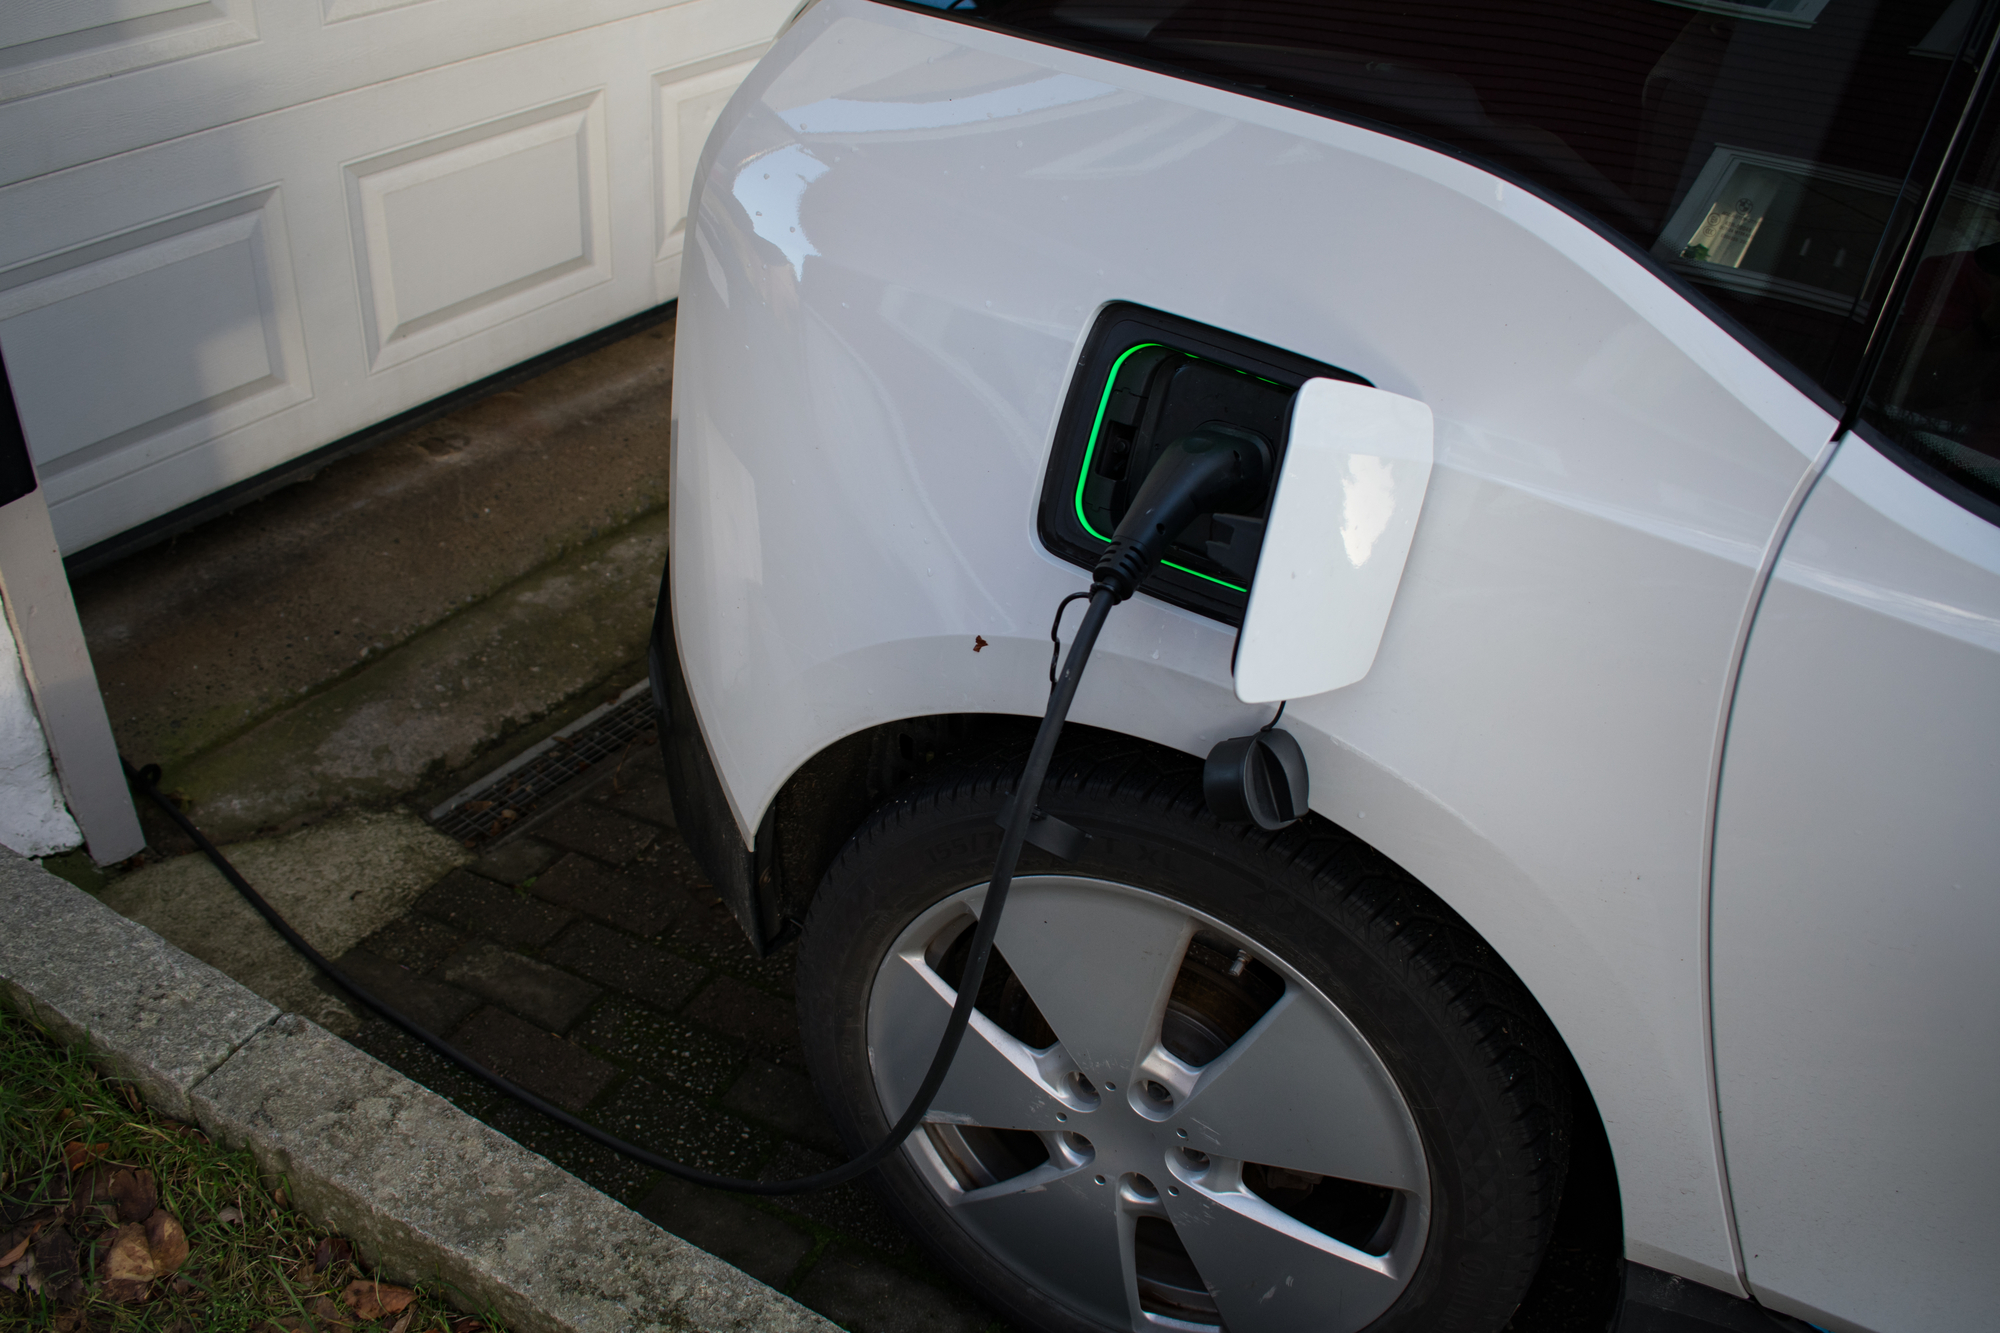 White electric vehicle being charged at home with a green illuminated charging port indicating ongoing EV home charging installation in the DFW area